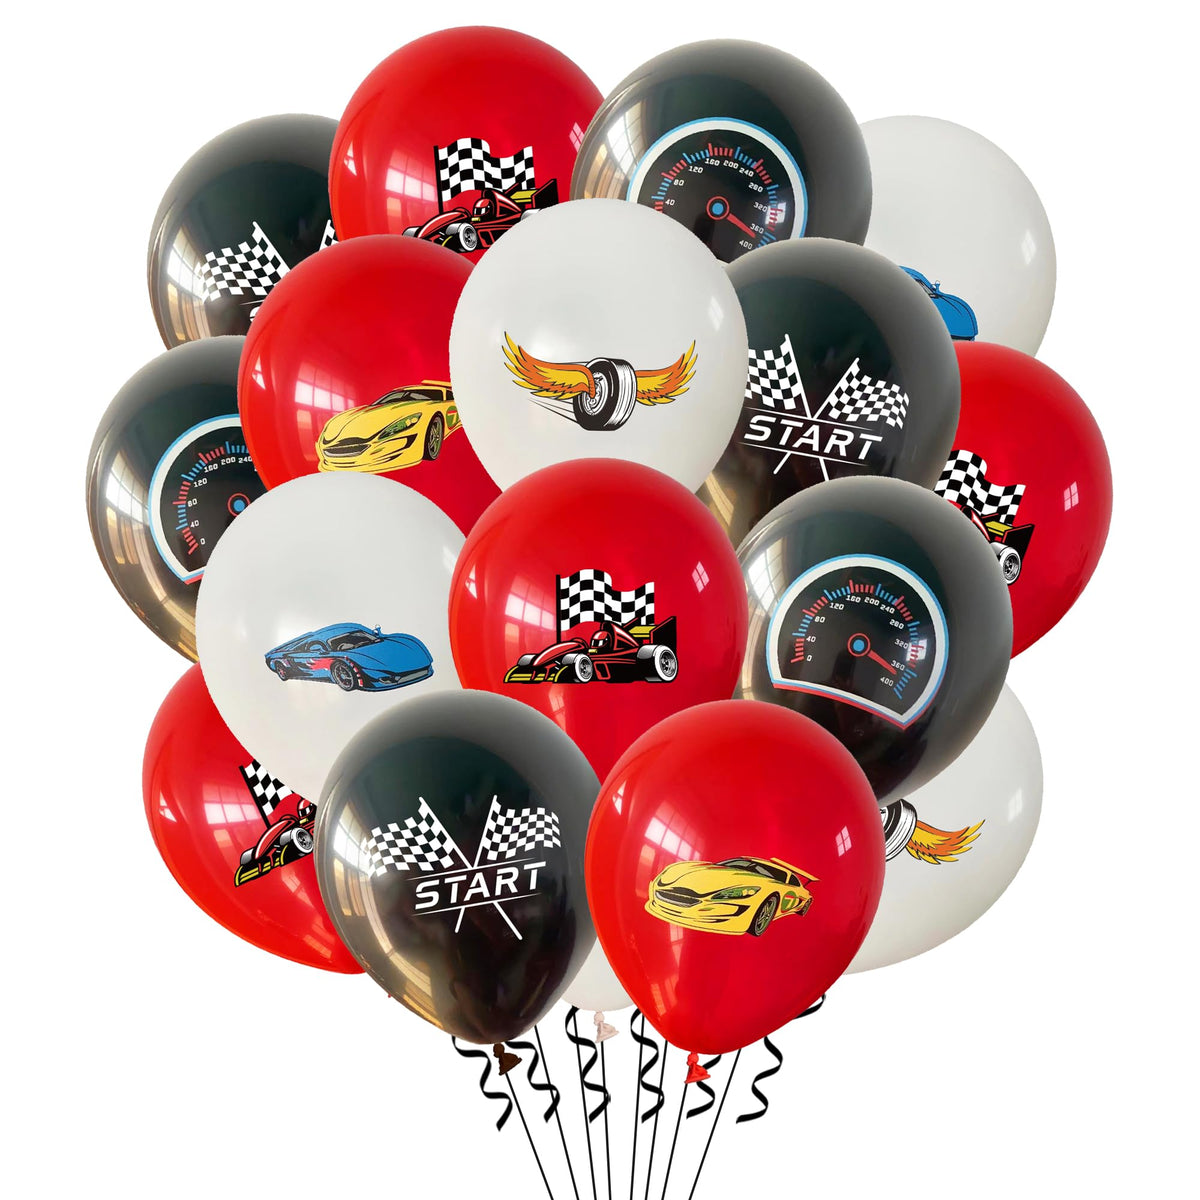 Racing Car Birthday Decorations Balloons - 42pieces Race Car Birthday Latex Balloons for Kids Racing Themed Birthday Party Decoration Supplies